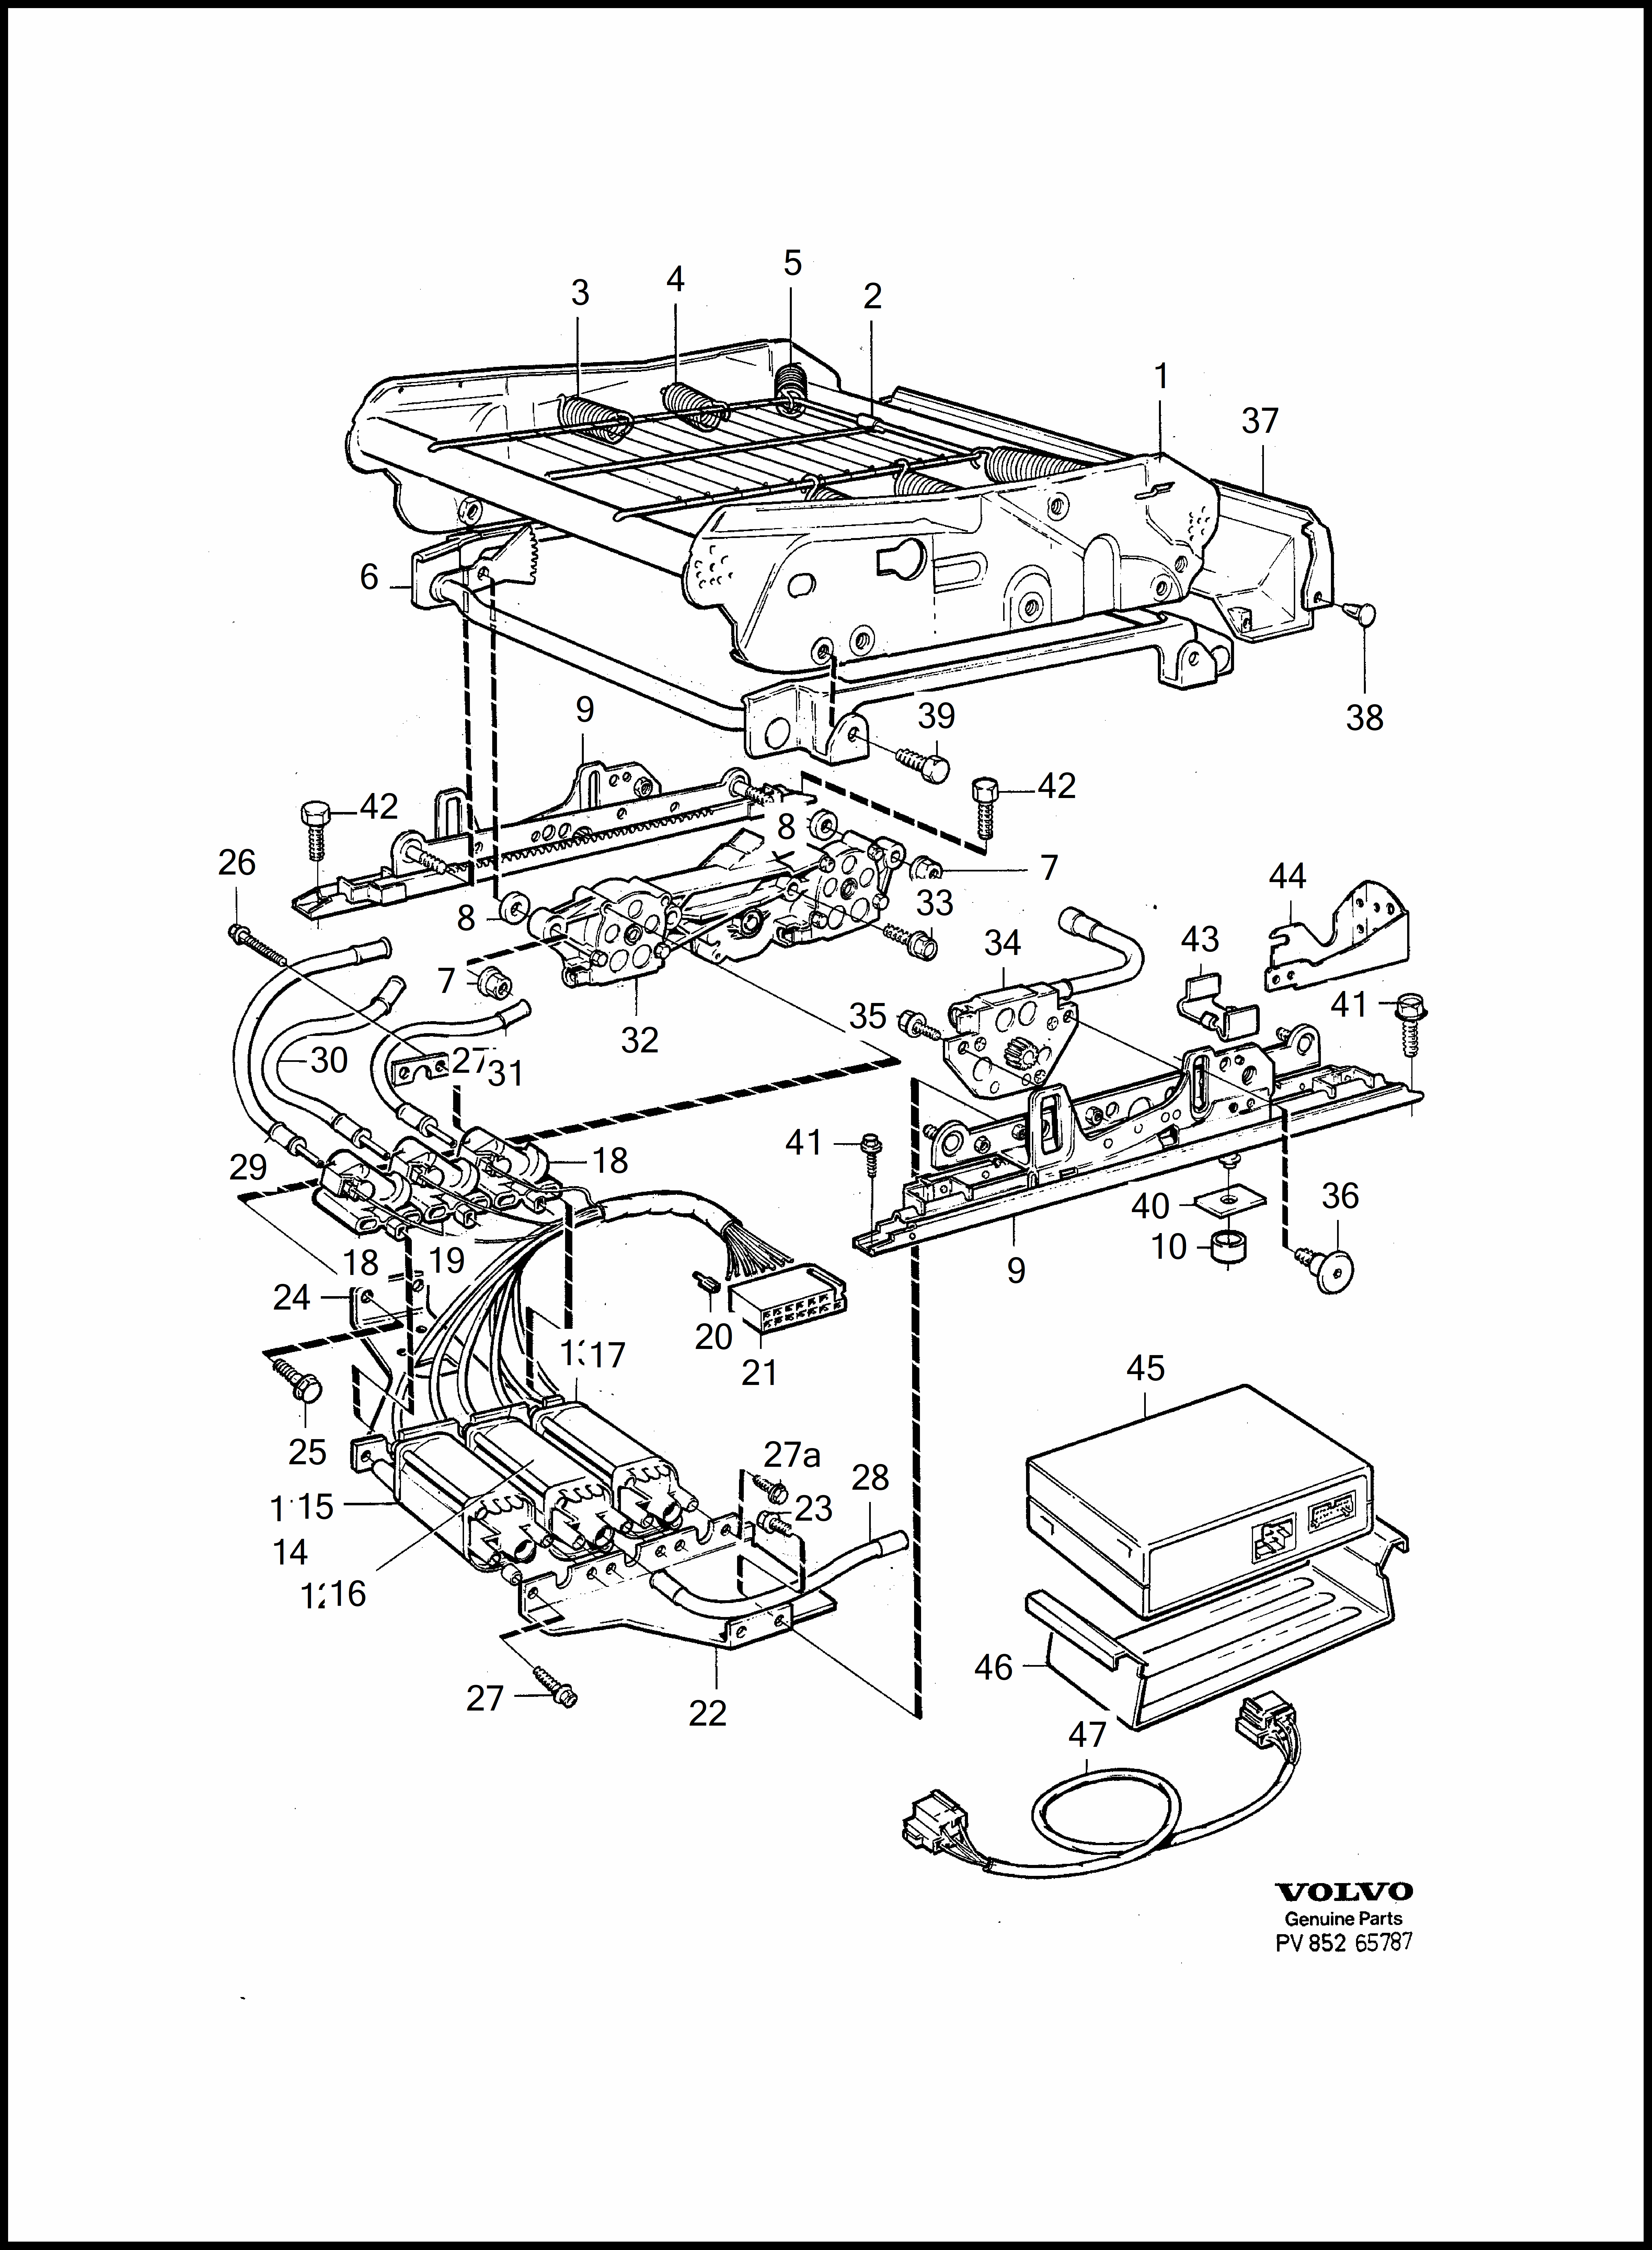 subframe for seat, electrical adjustment pour Volvo 960 960